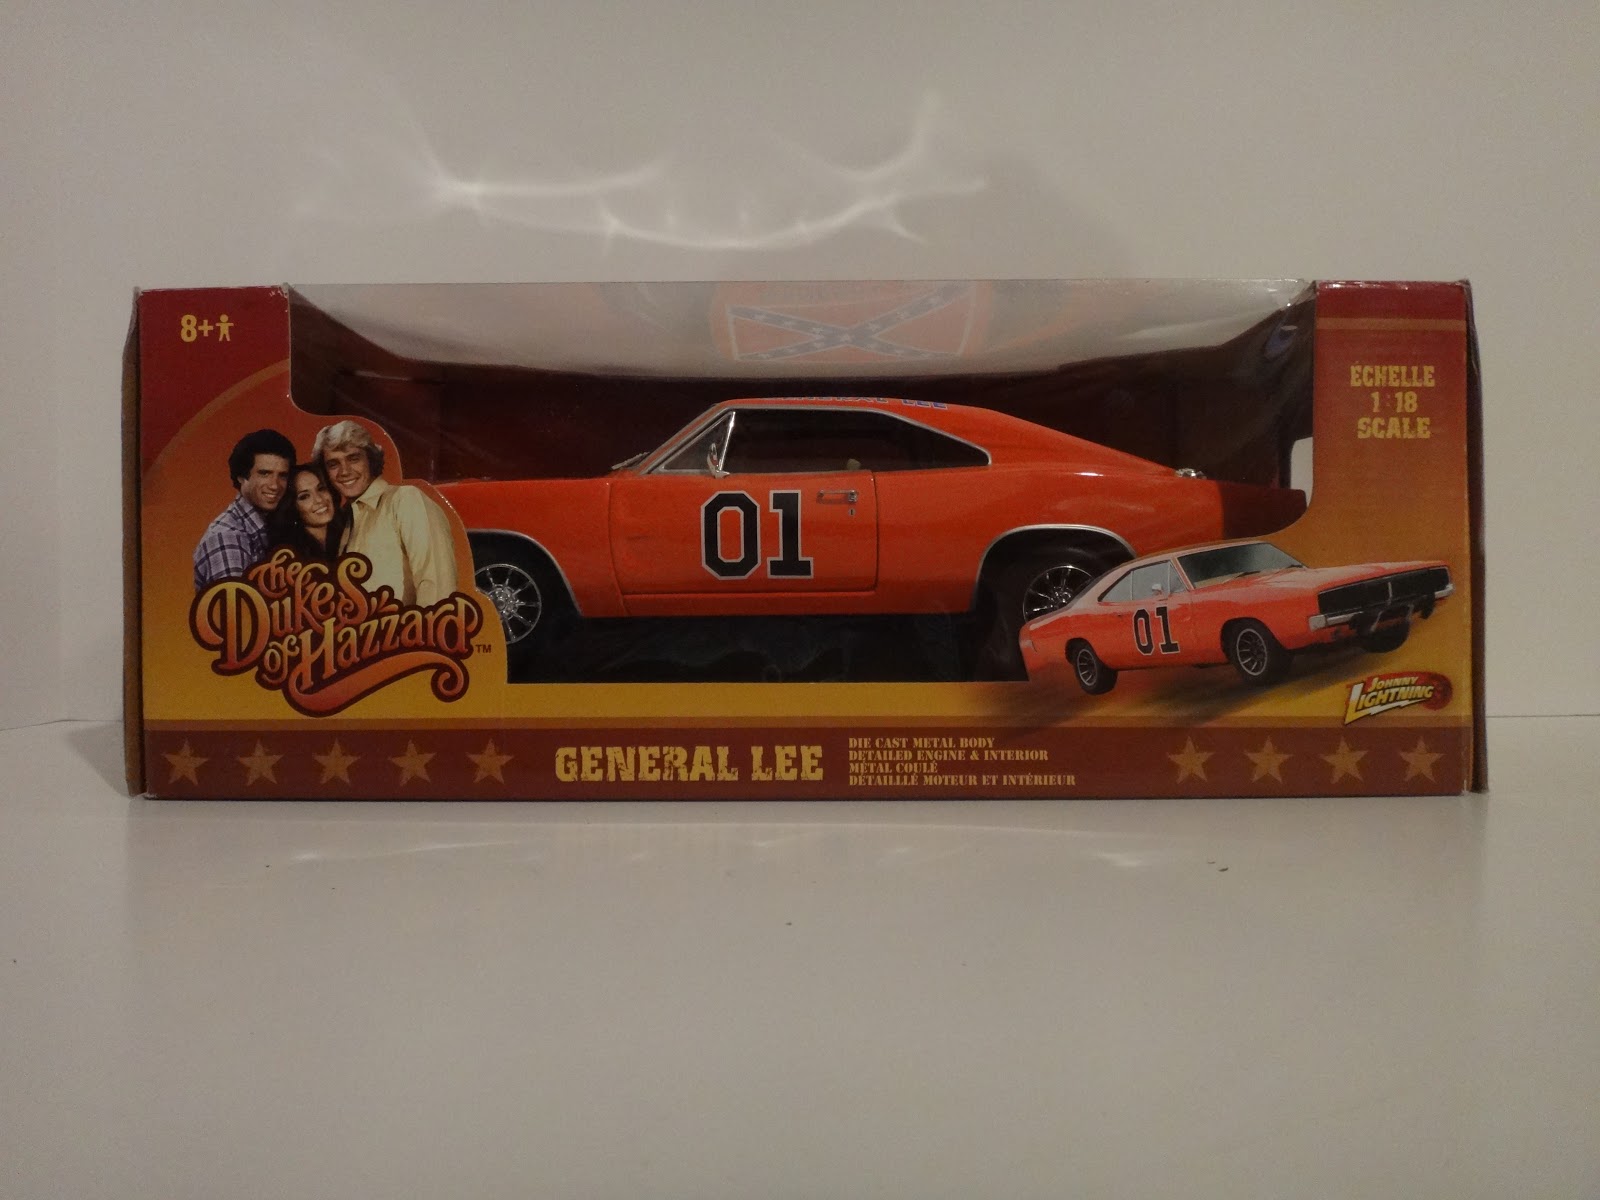 1968 DUKES OF HAZZARD COOTER'S FORD MUSTANG 1/18 DIECAST CAR TOMY 21957BU 